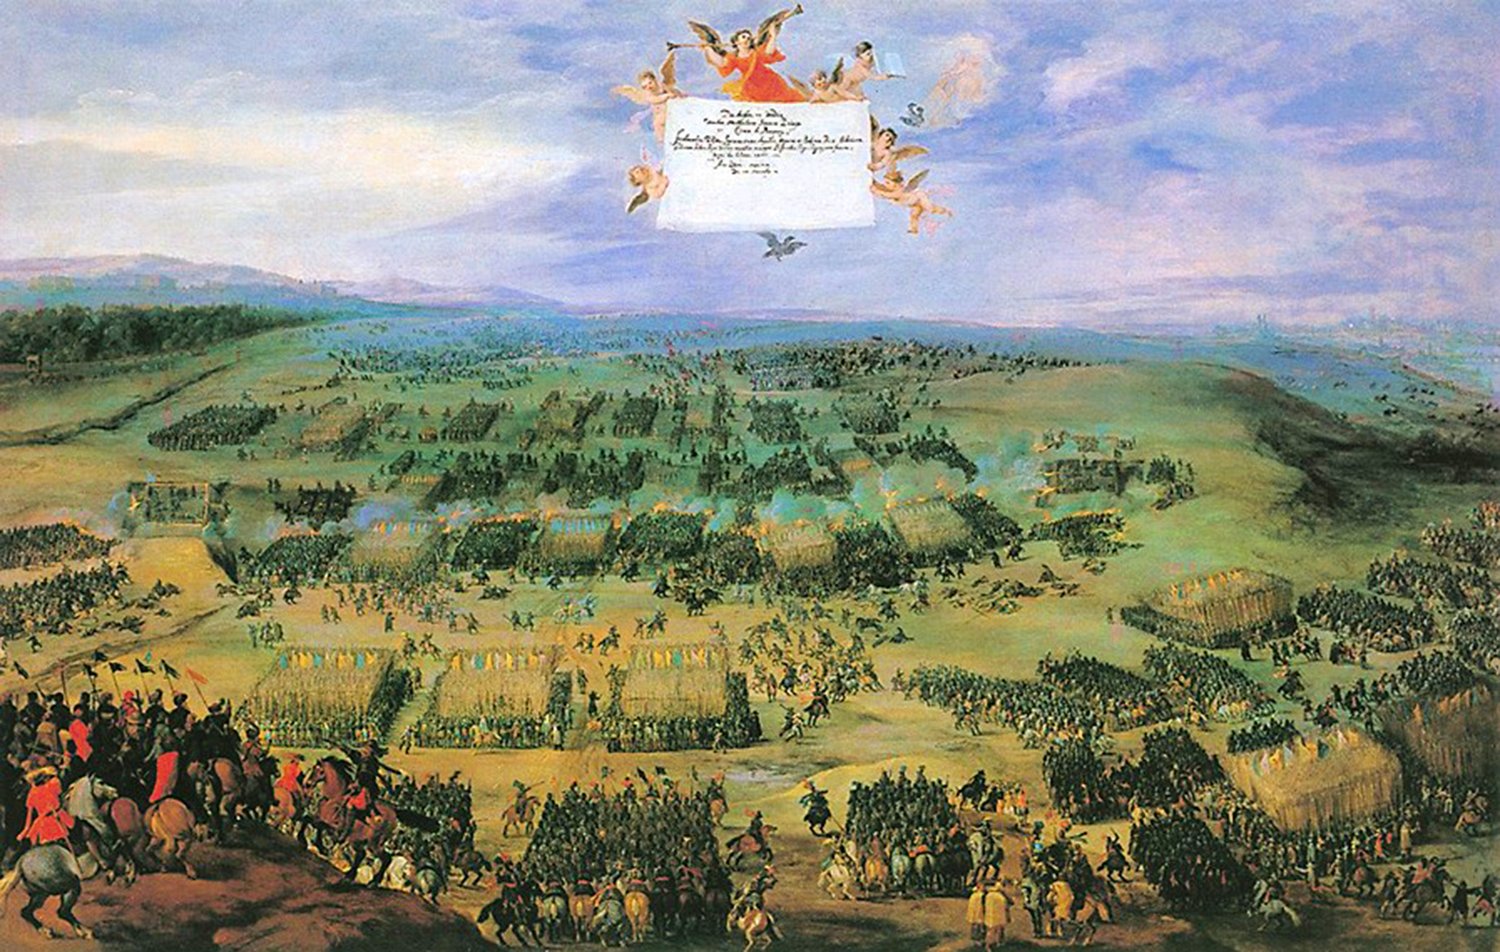 A panoramic painting of the Battle of White Mountain, depicting expansive landscapes with undulating hills. Multiple formations of soldiers, distinguishable by their uniforms and standards, engage in combat across the field. Cavalry units are seen galloping, while infantry hold their ground in tight formations. On the left foreground, commanders on horseback appear to be strategizing. In the sky, a group of cherubic angels holds a white banner containing inscriptions, symbolizing divine intervention or endorsement.